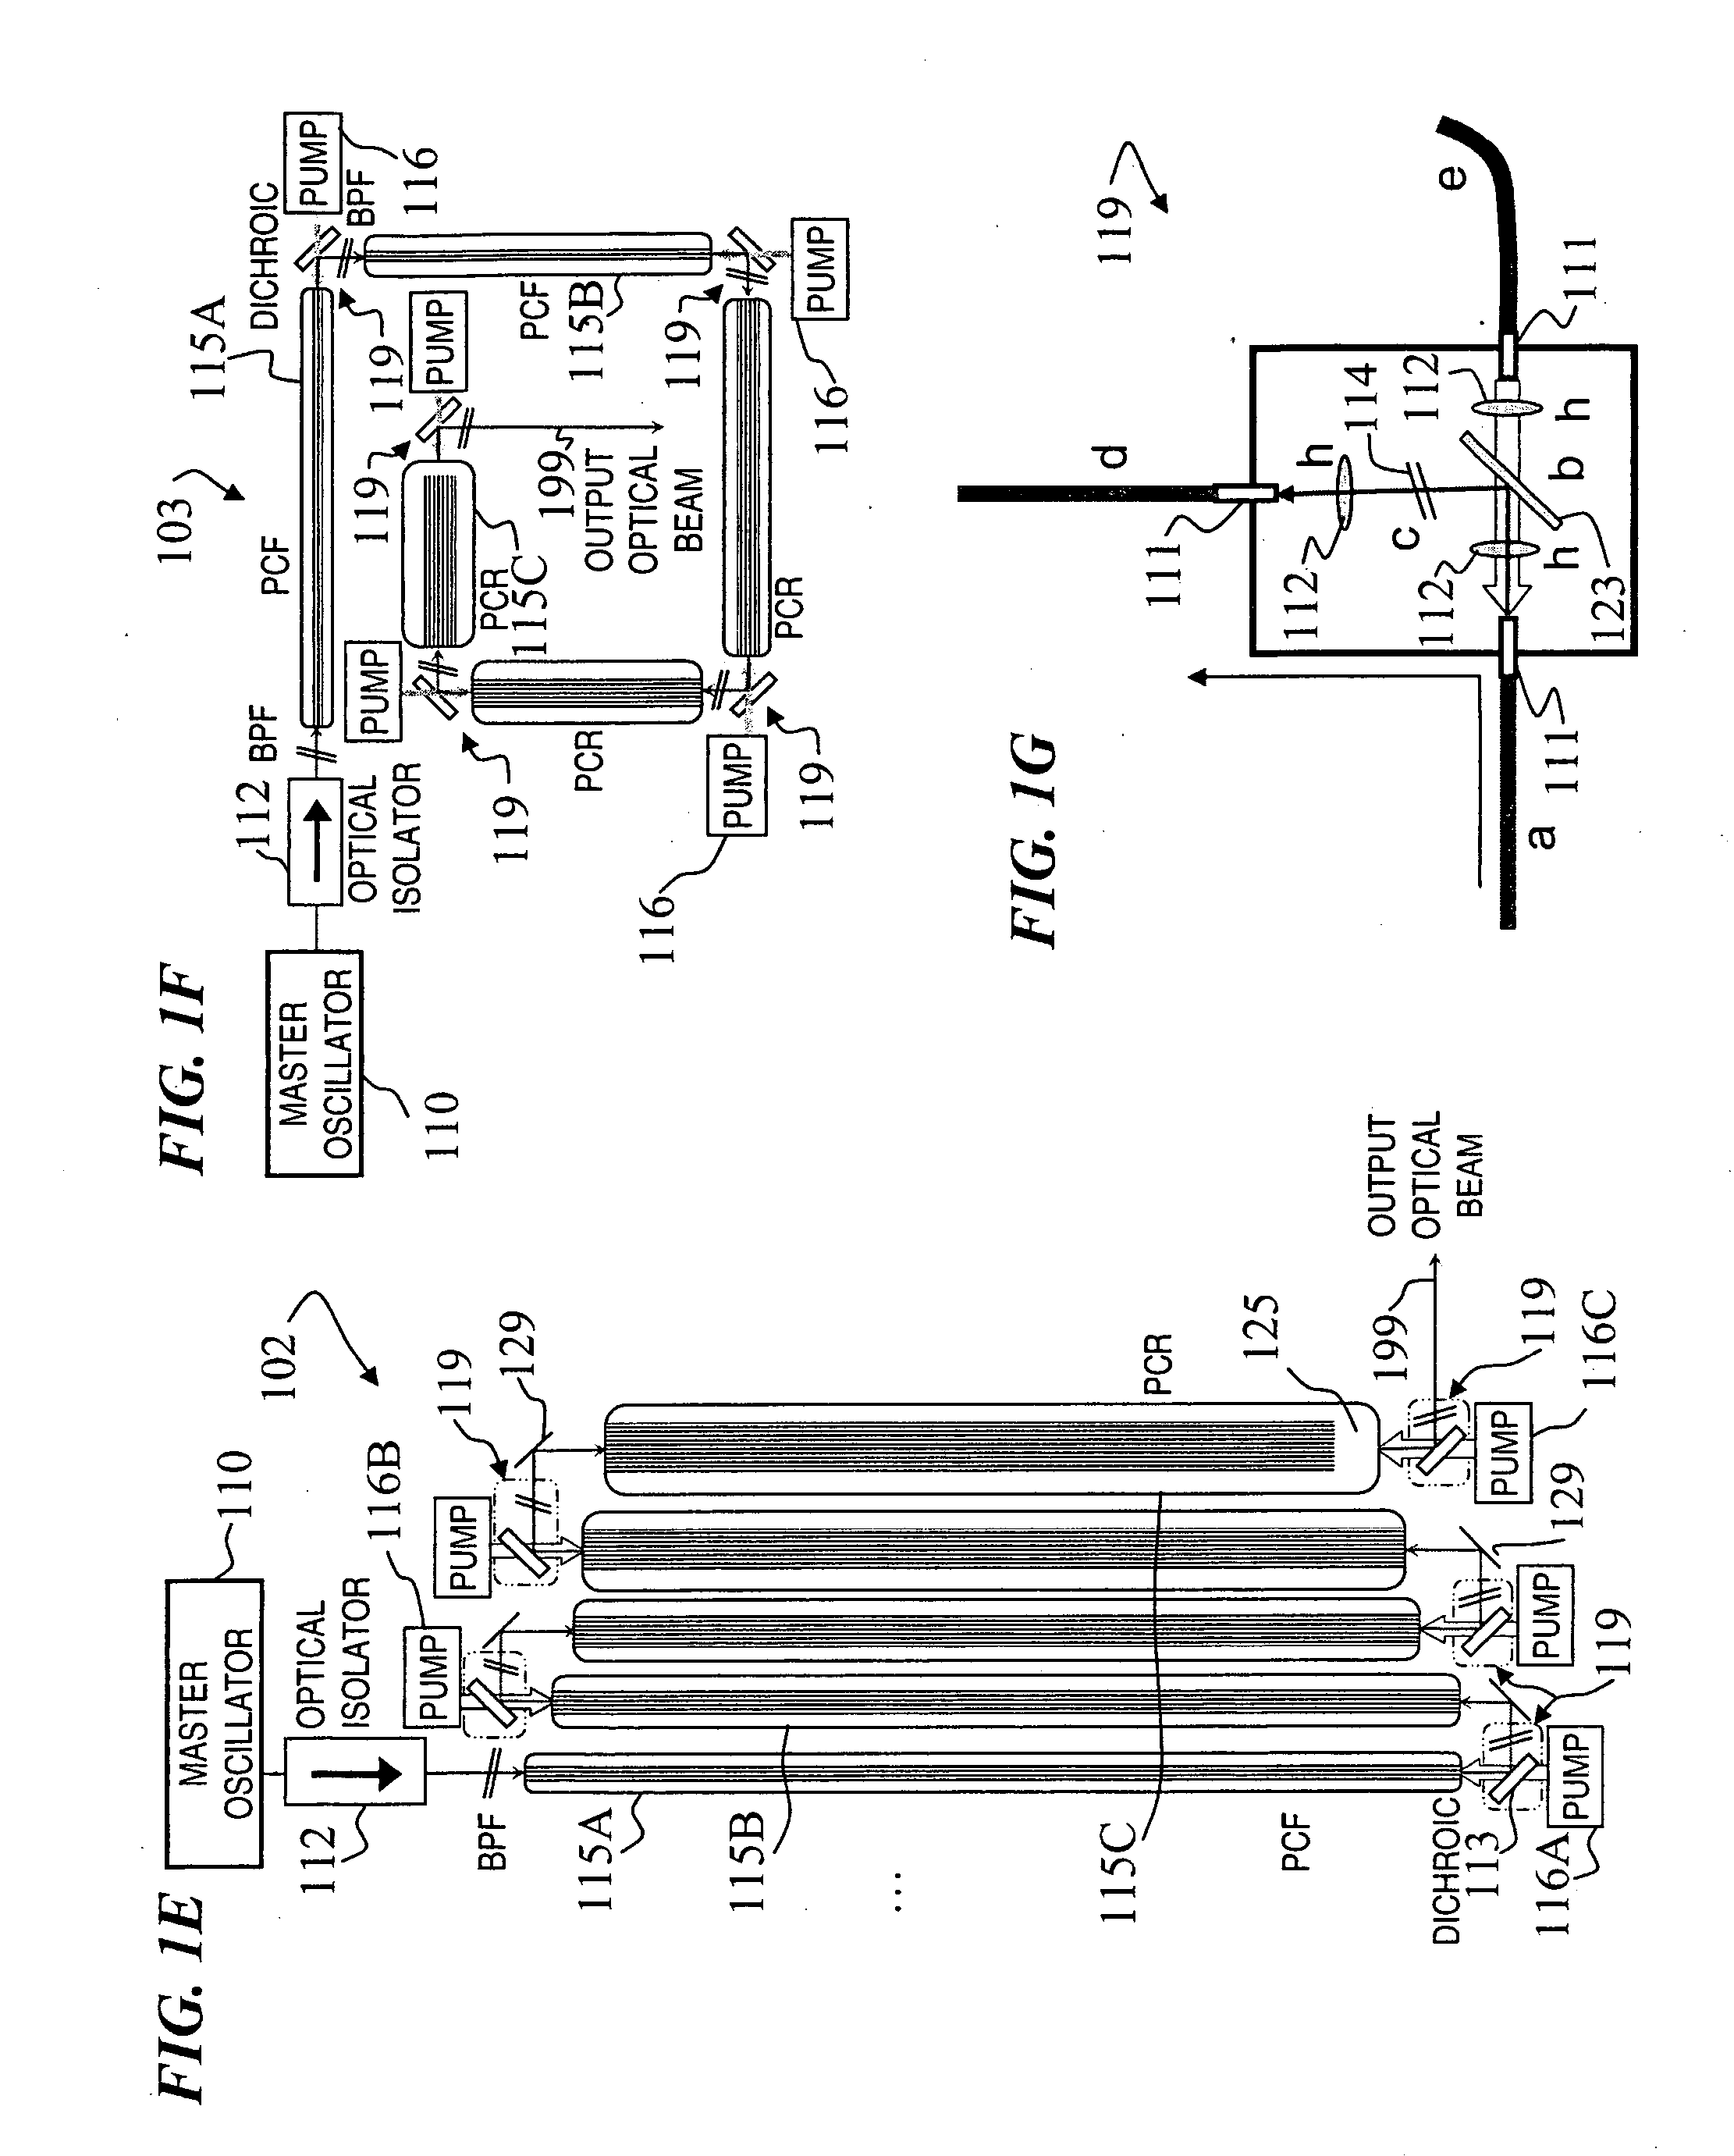 Multi-segment photonic-crystal-rod waveguides for amplification of high-power pulsed optical radiation and associated method